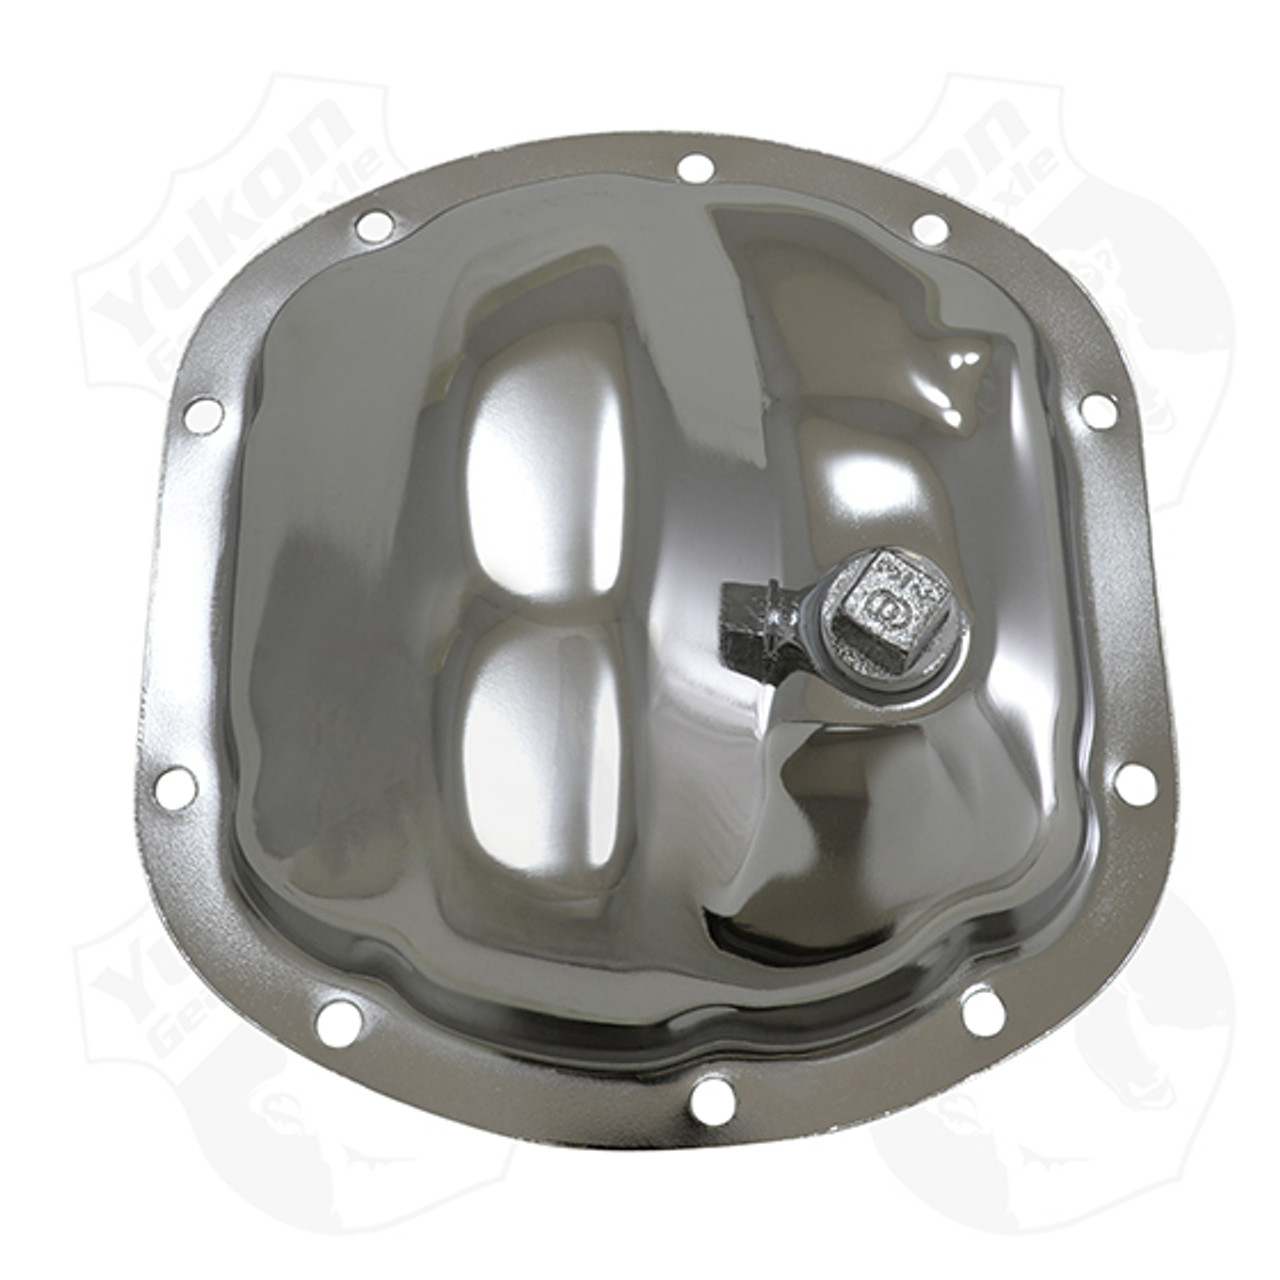 Replacement Chrome Cover for Dana 30 Standard rotation